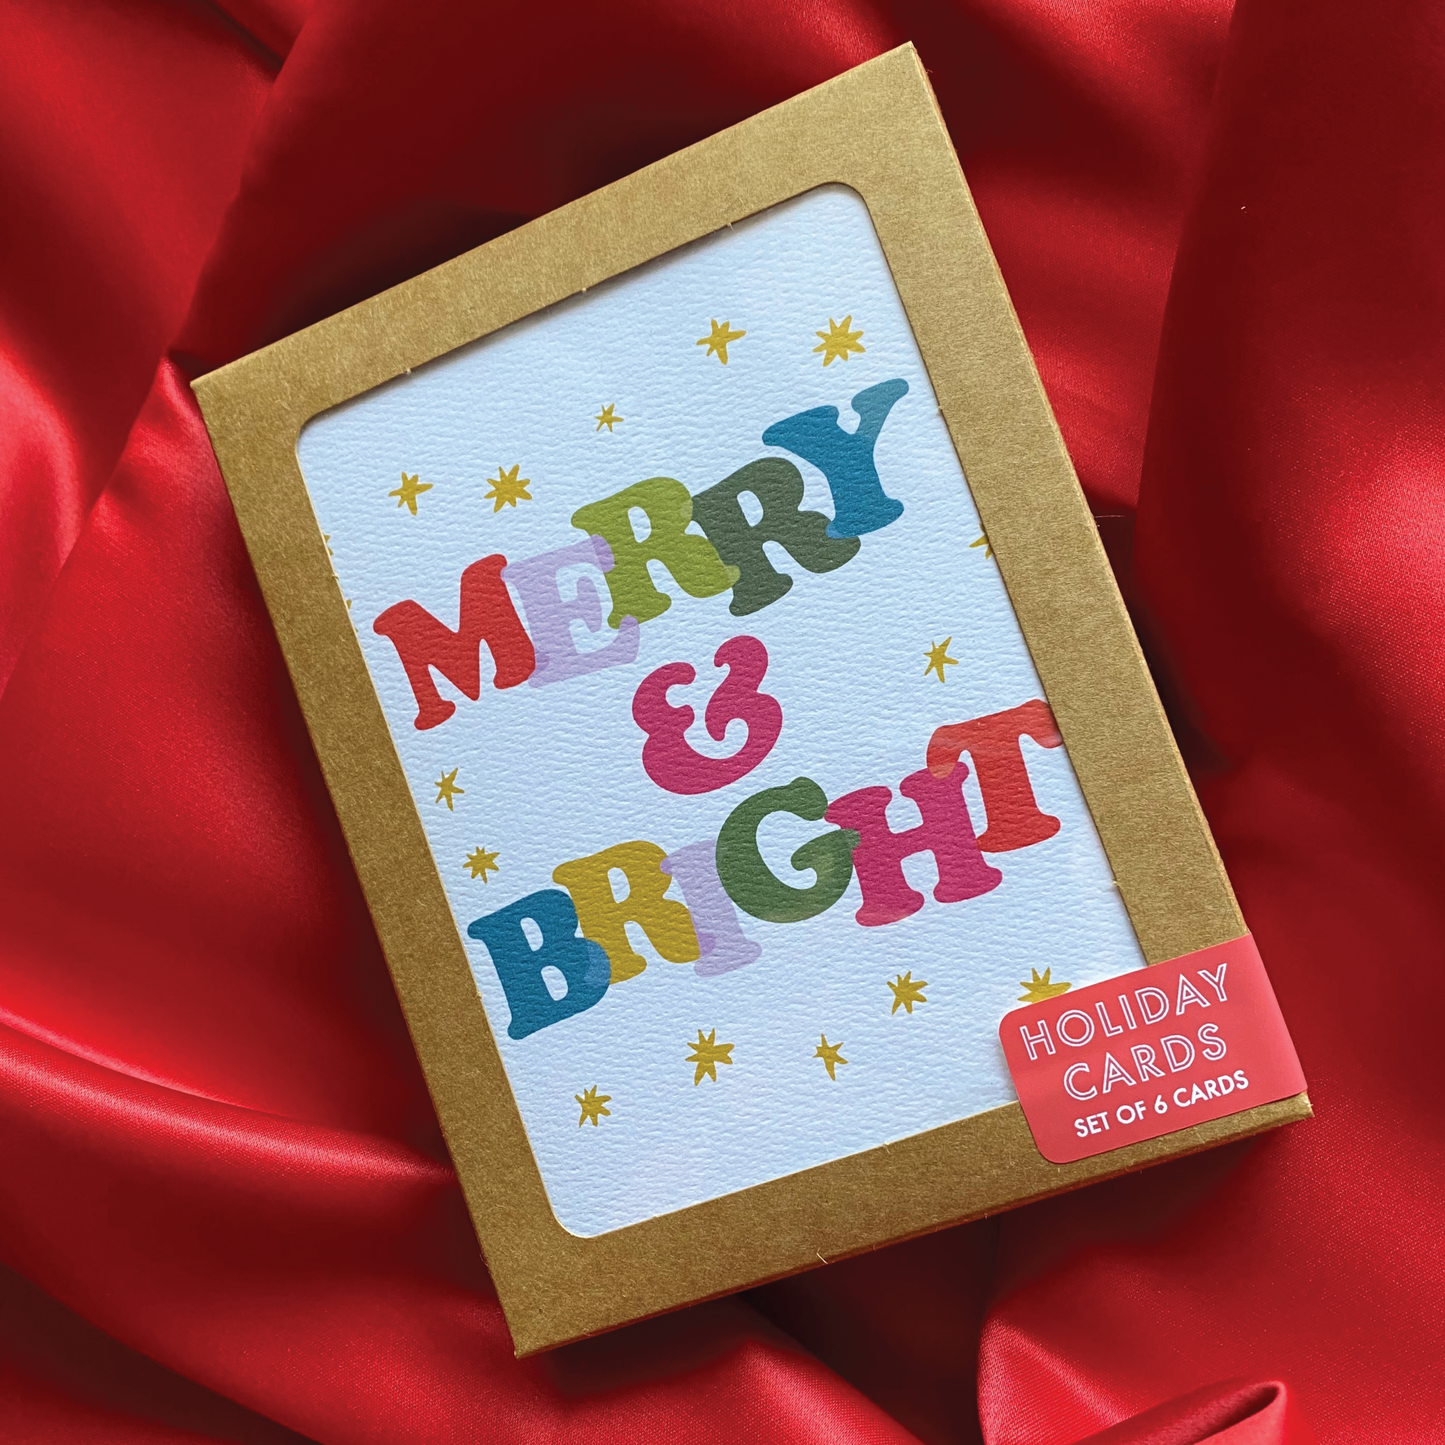 LET'S JINGLE: Boxed Set of 6 Cards